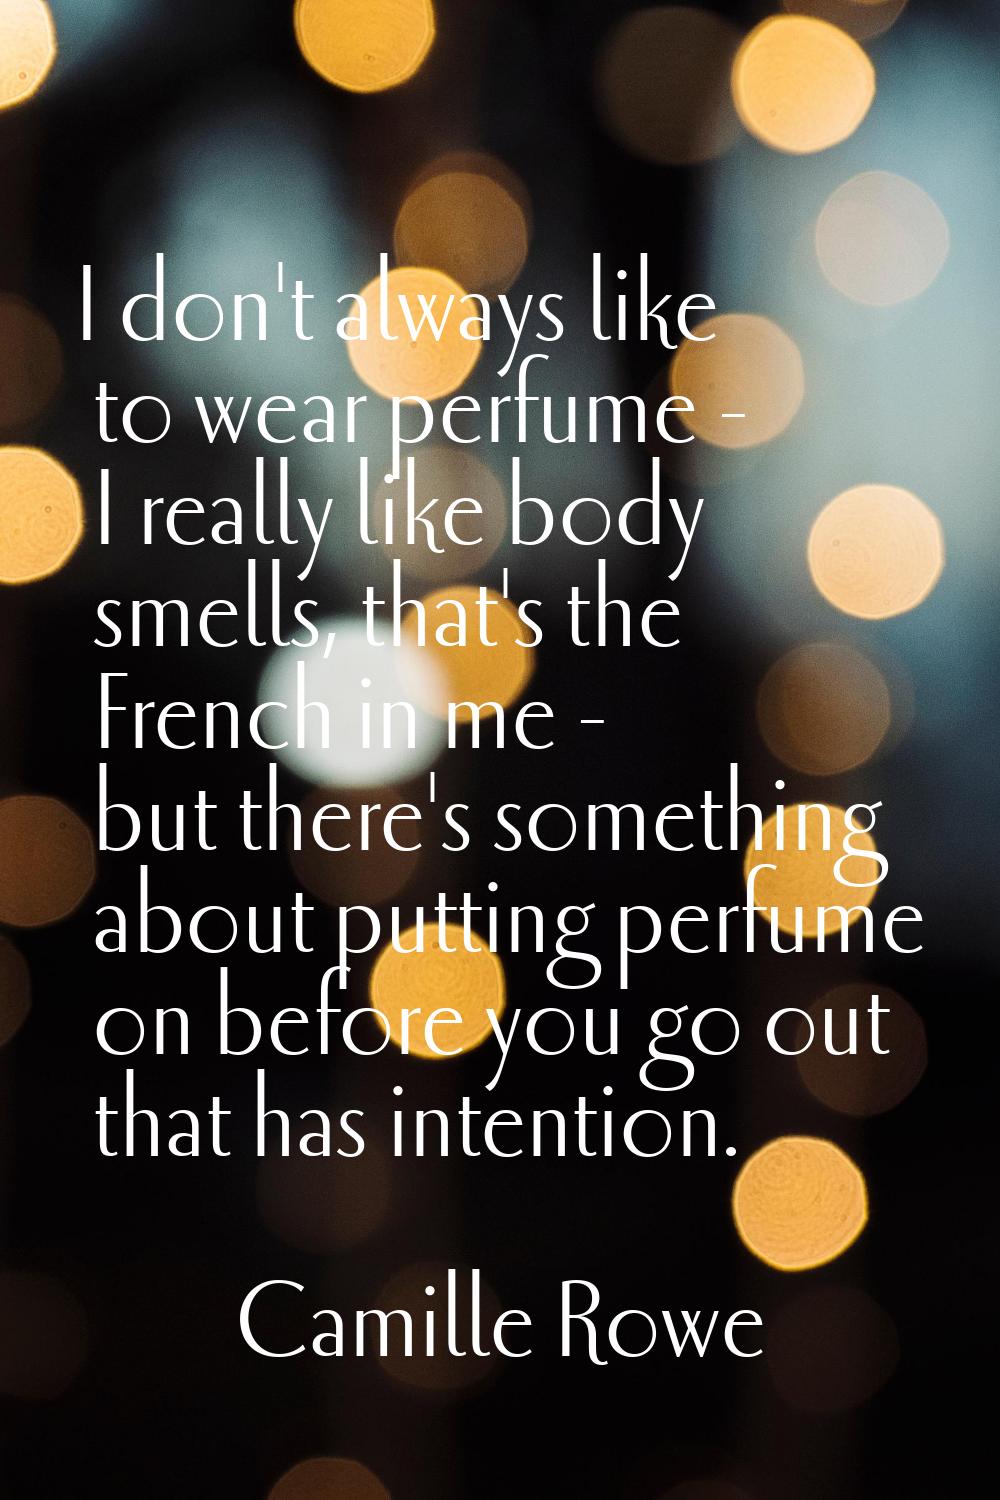 I don't always like to wear perfume - I really like body smells, that's the French in me - but ther